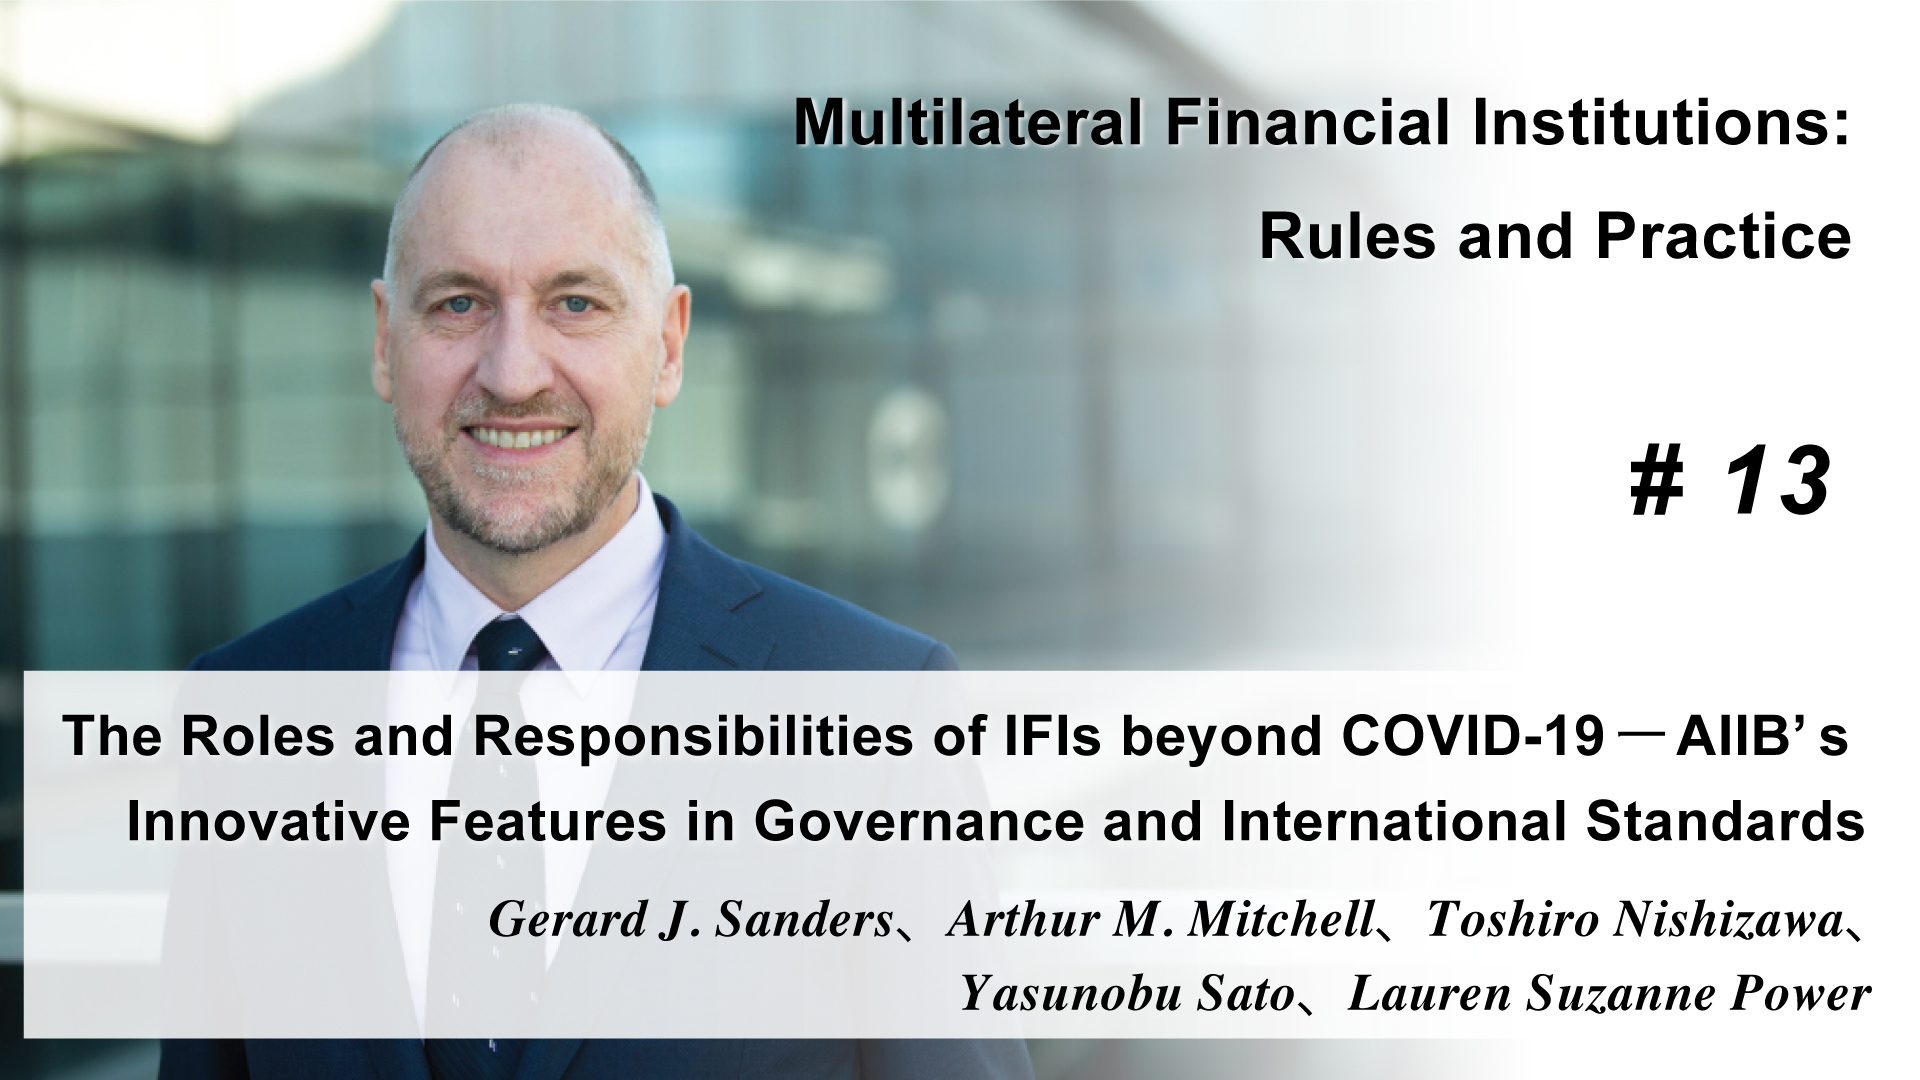 The Roles and Responsibilities of IFIs beyond COVID-19—AIIB’s Innovative Features in Governance and International Standards